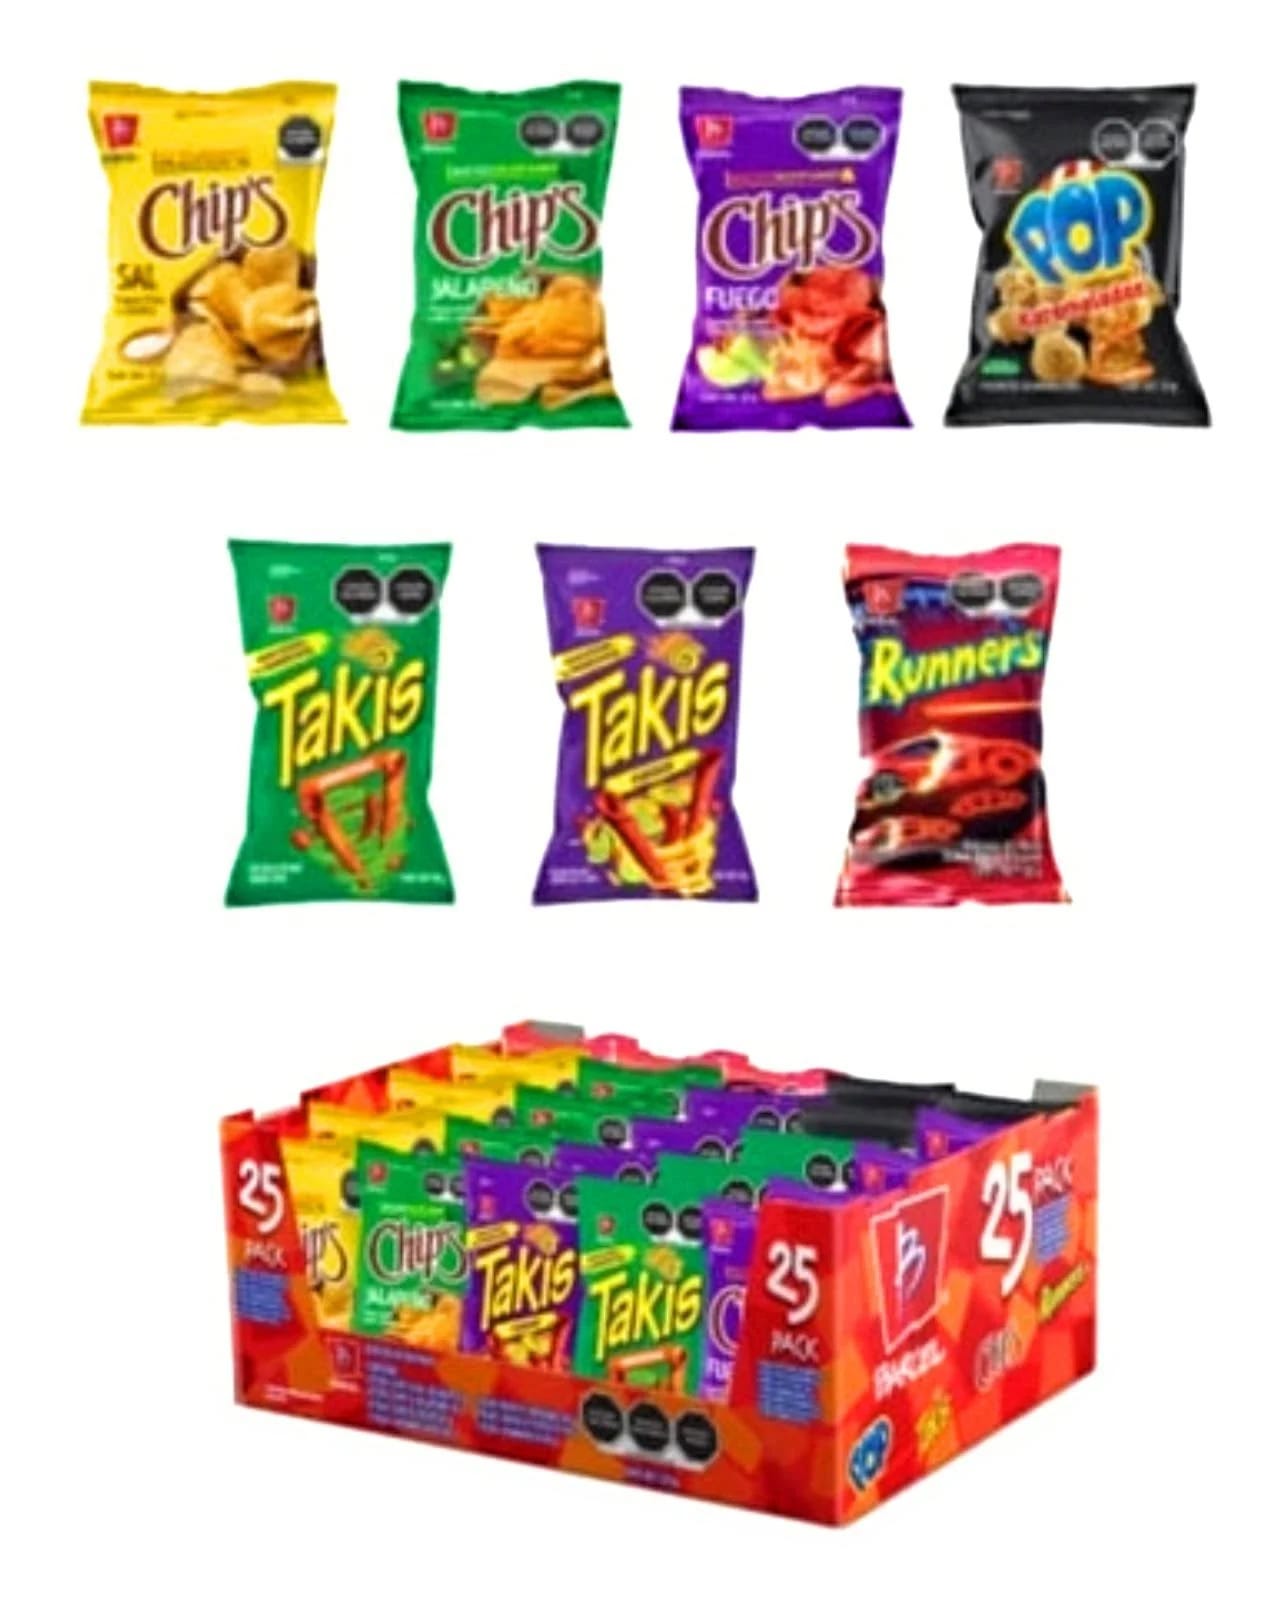 Takis Fuego Variety Pack with Barcel Chips and Runners - 25 Pieces | Image